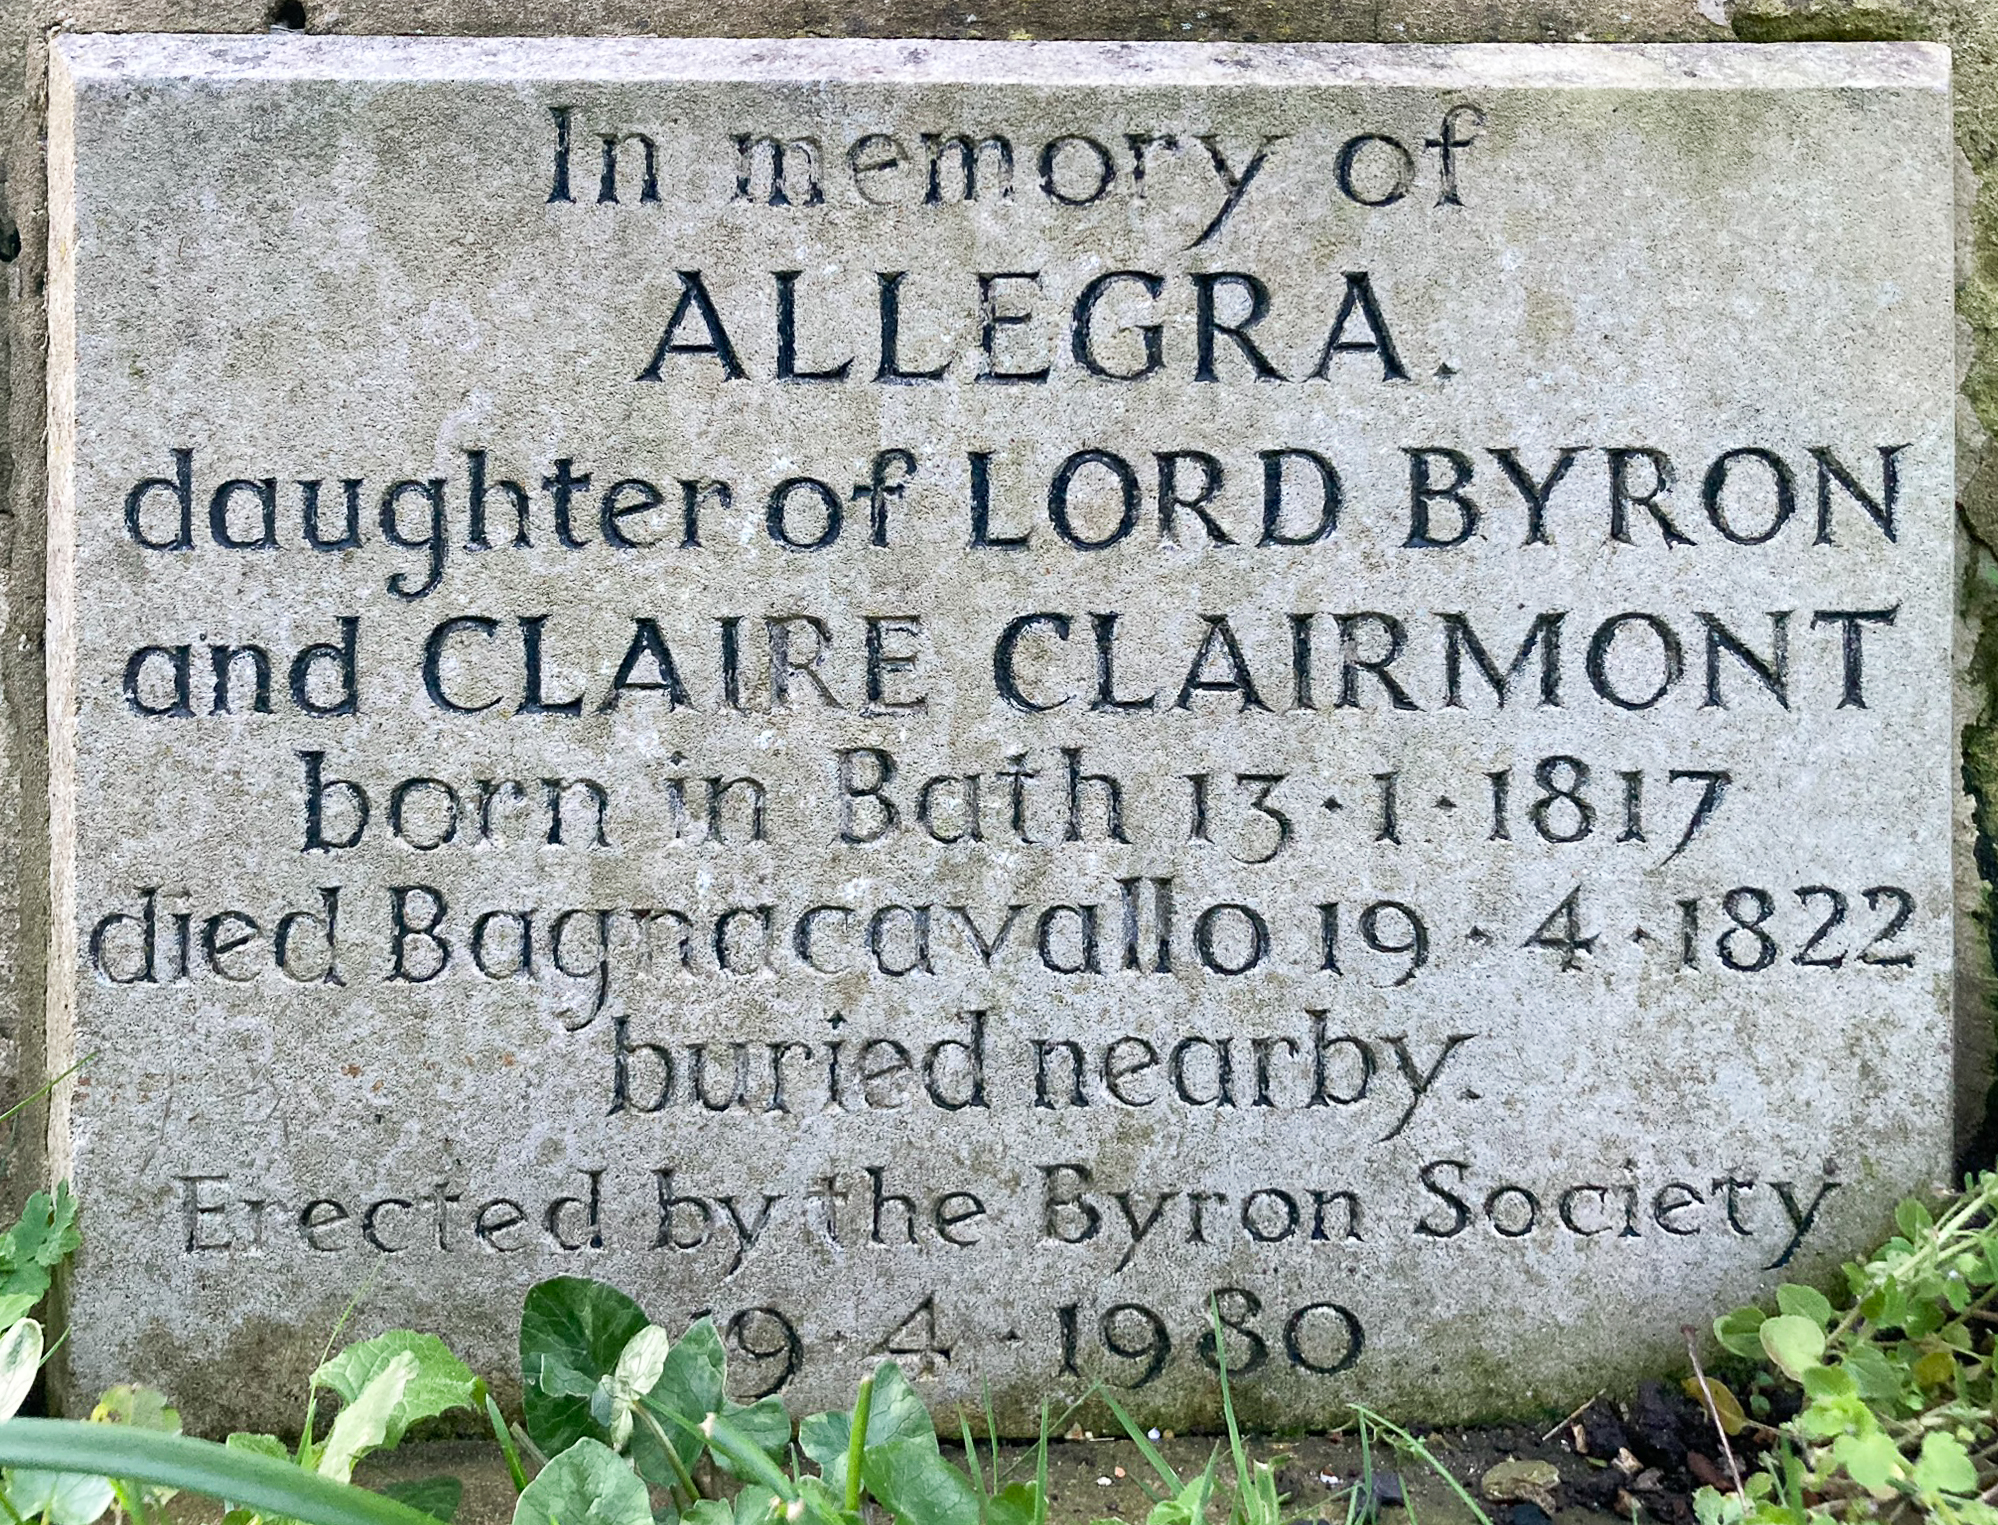 A stone memorial plaque for Allegra, daughter of Lord Byron and Claire Clairmont. It bears her birth and death dates: 13.1.18